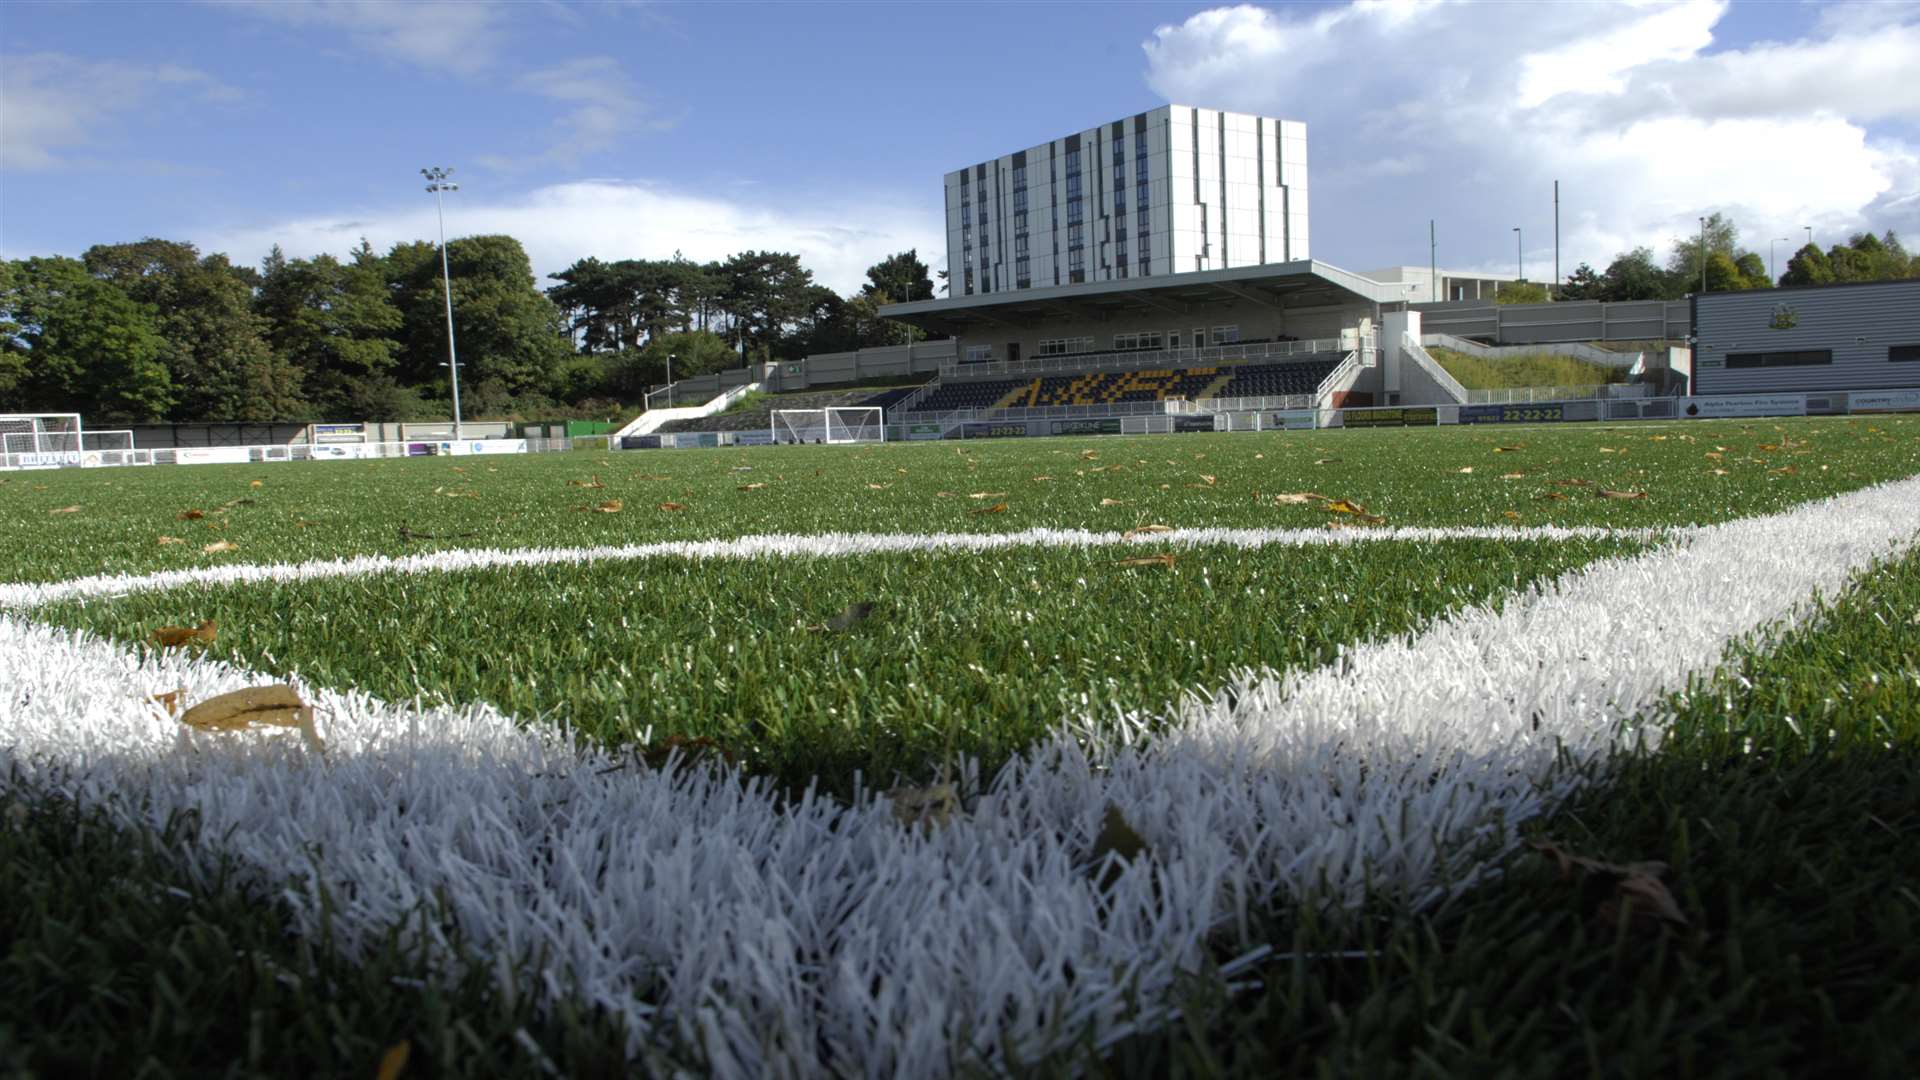 The Gallagher Stadium, with its 3G pitch. Picture: Martin Apps